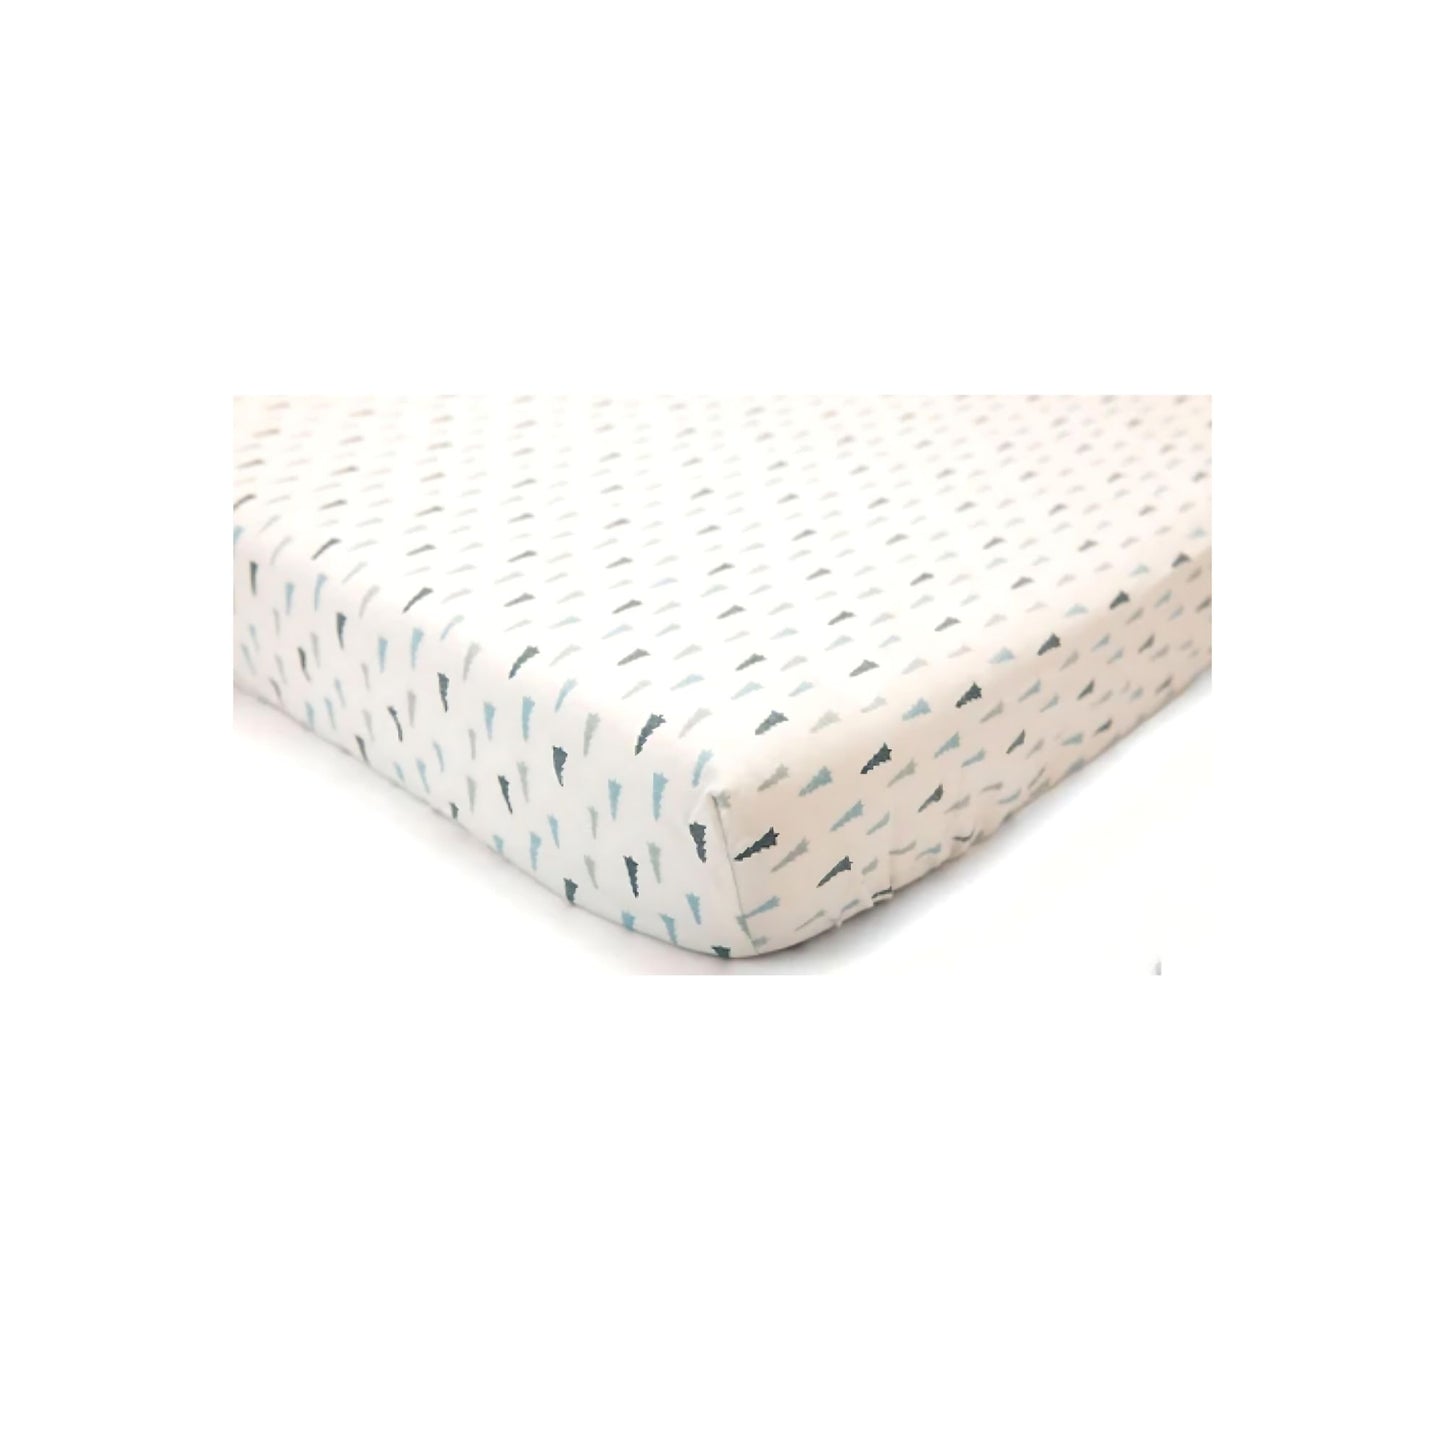 Zyji Baby Crib Fitted Sheet